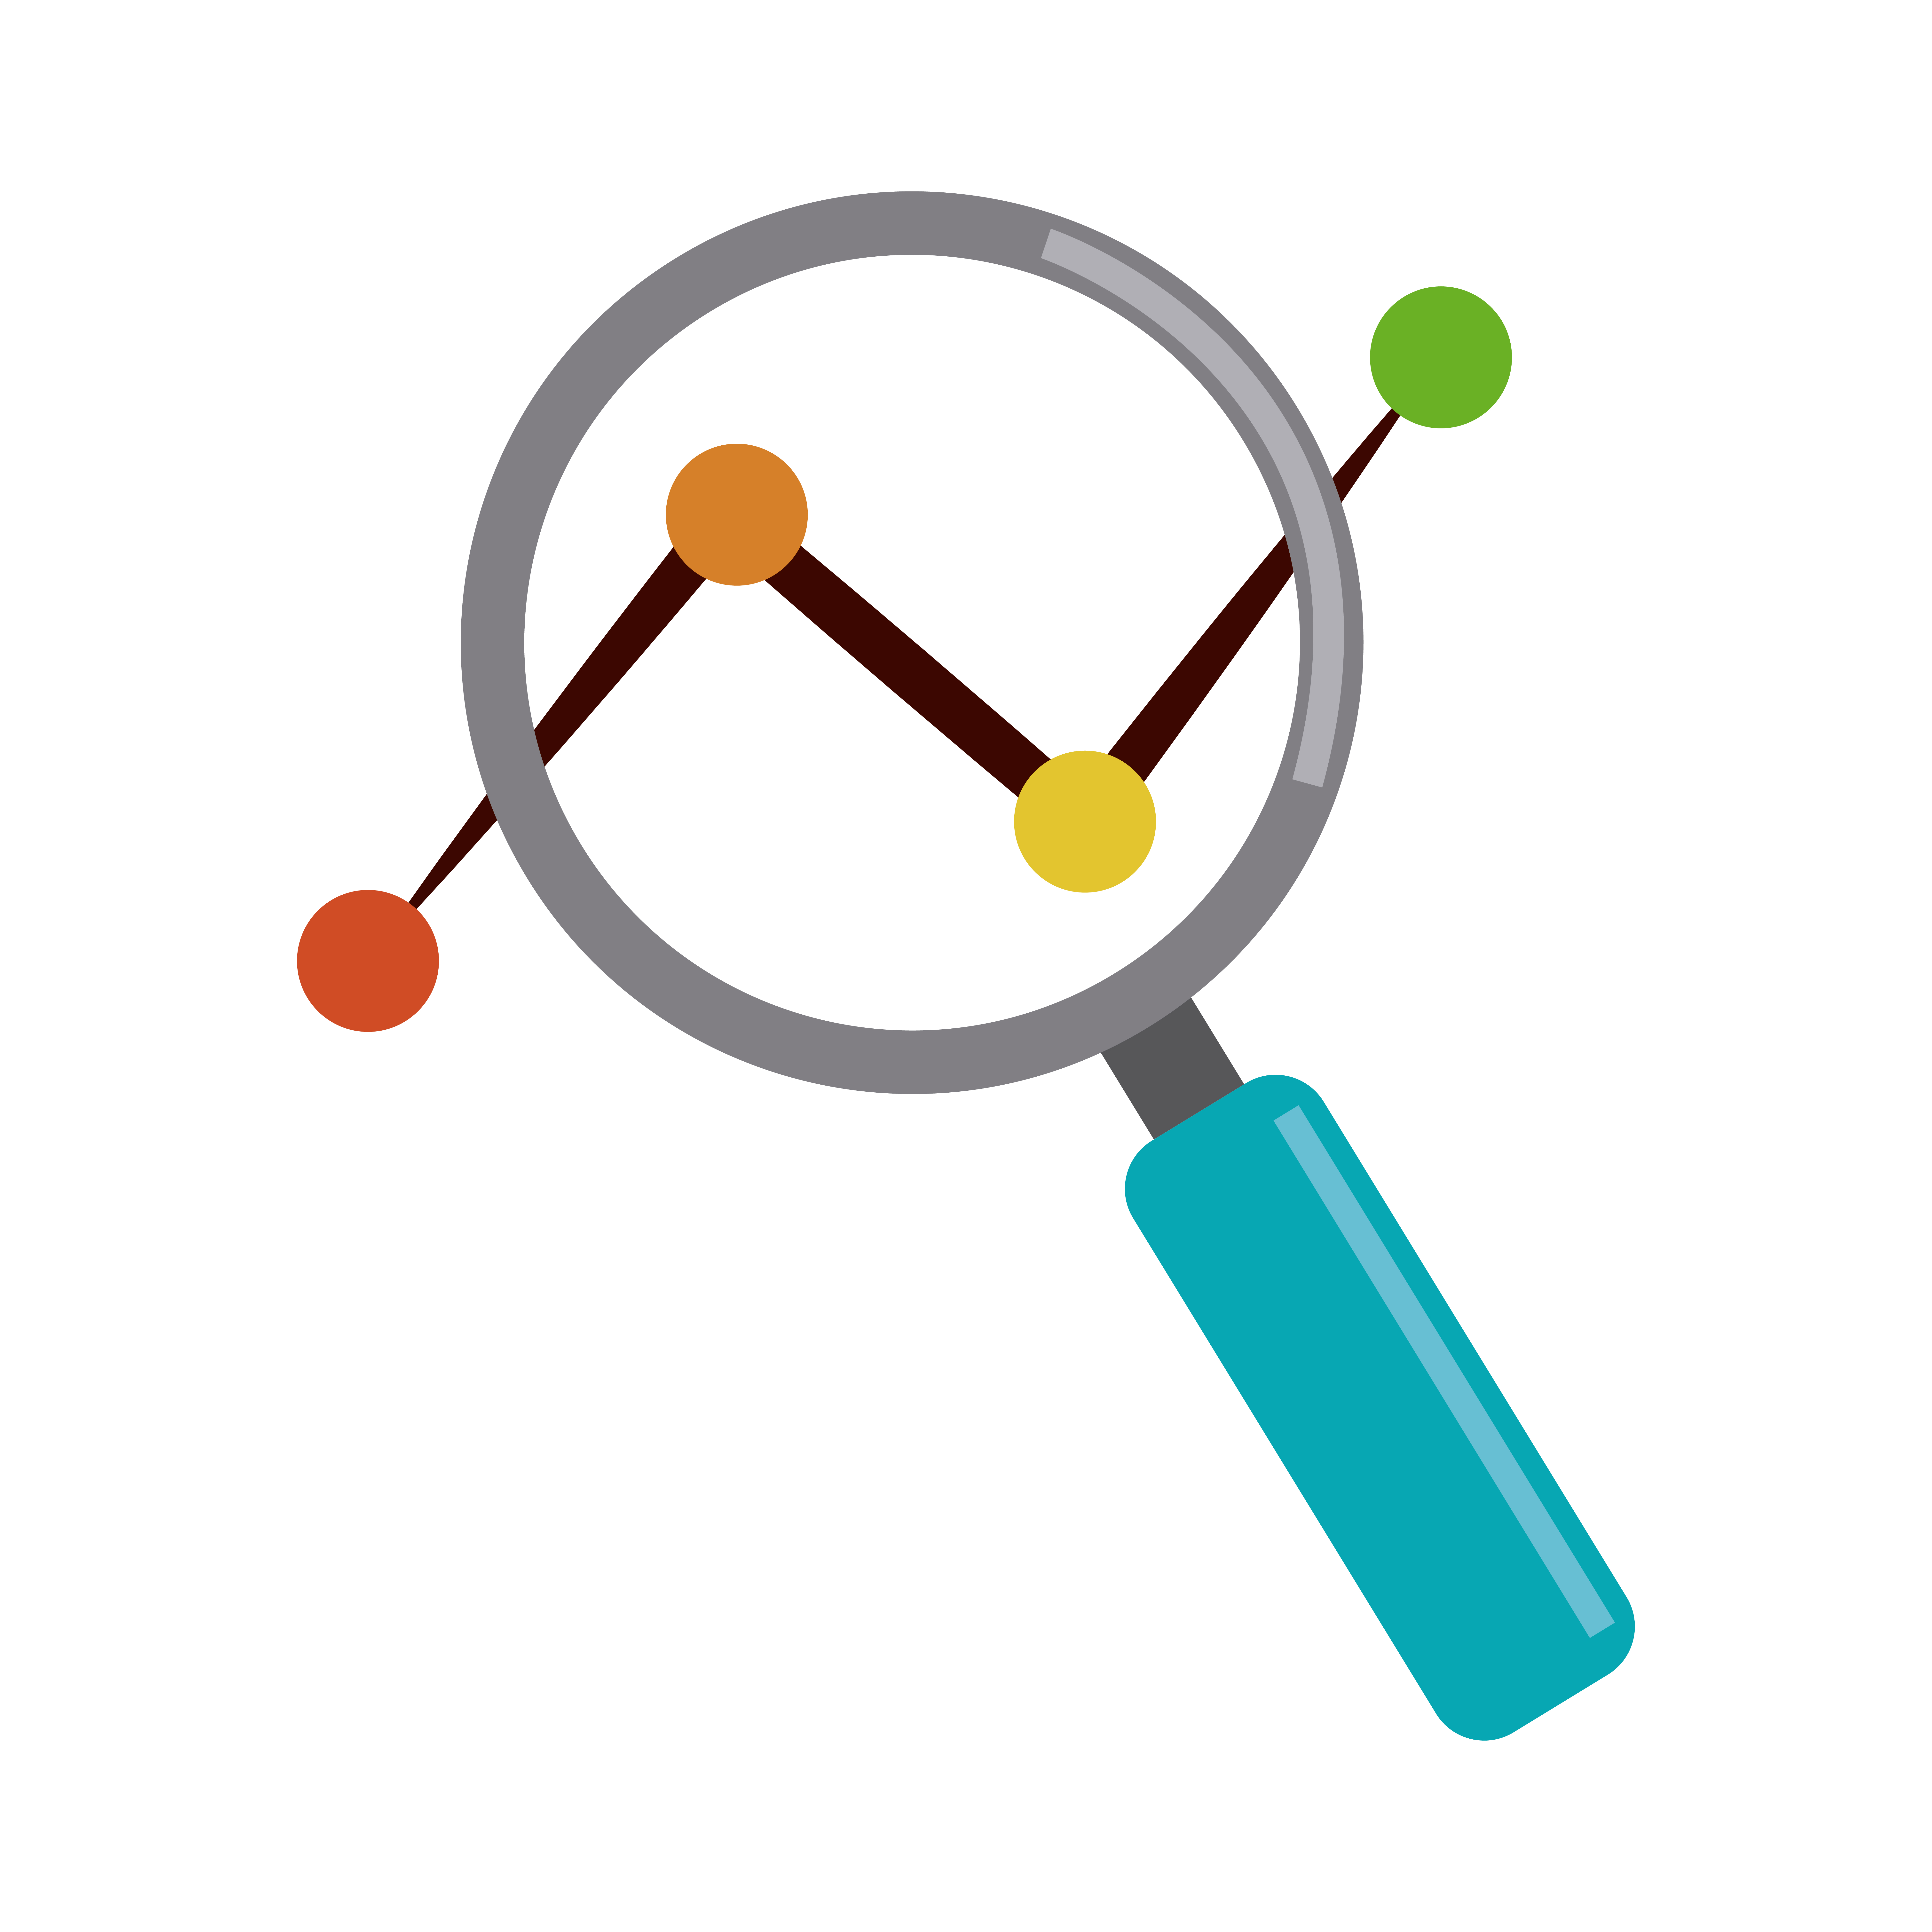 Free Stock Photo of Analysis Magnifier Represents Data Analytics And Analyse